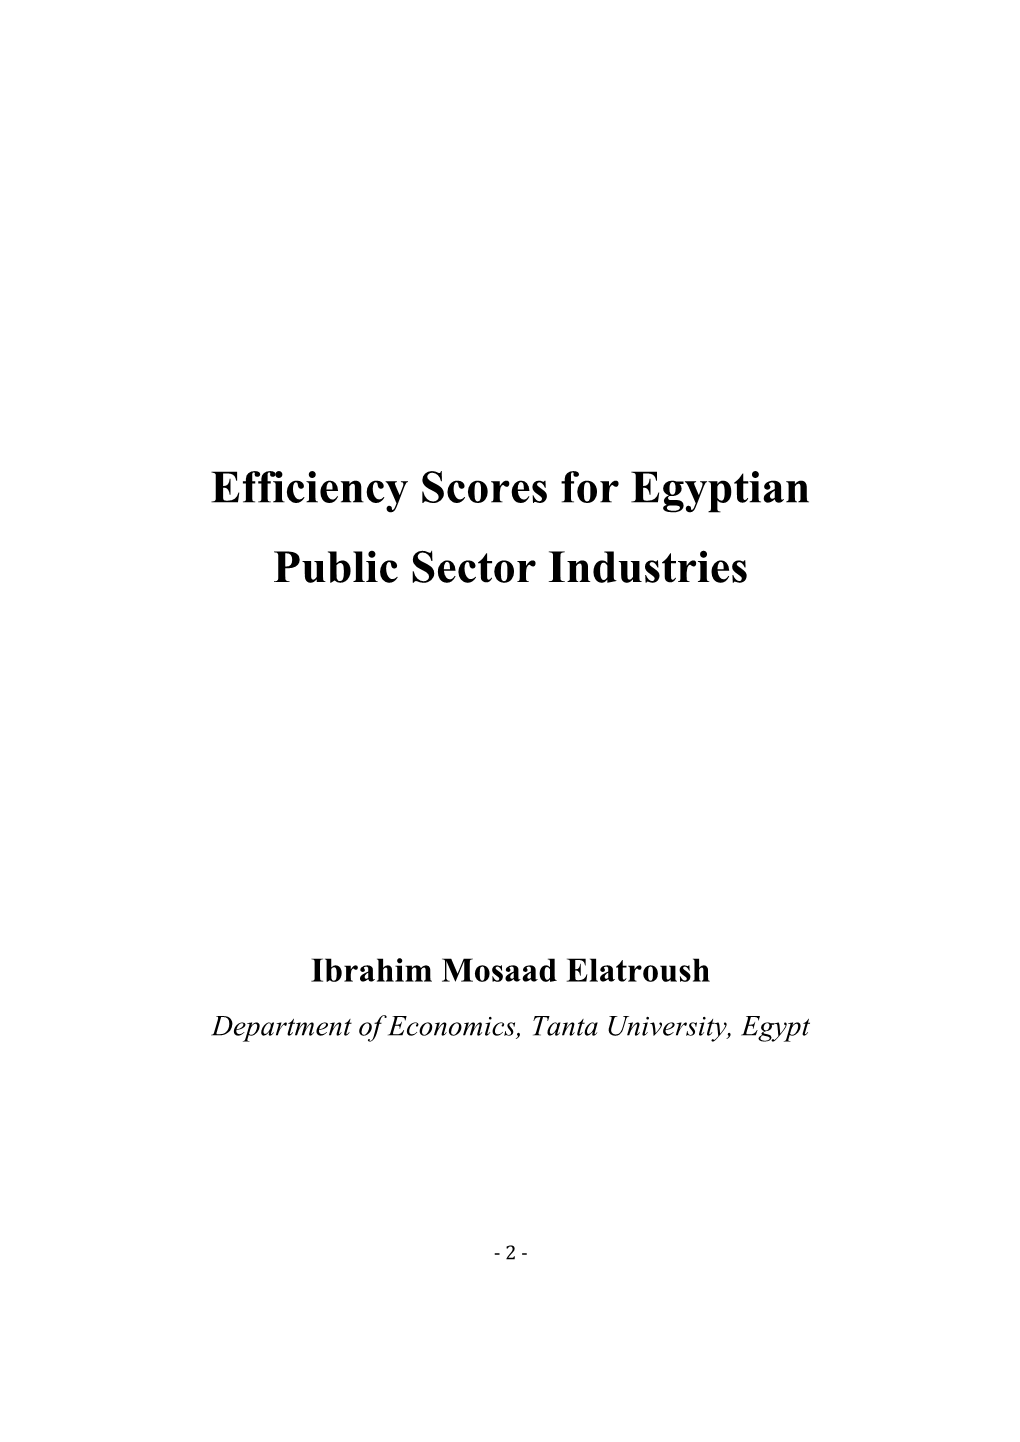 Efficiency Scores for Egyptian Public Sector Industries